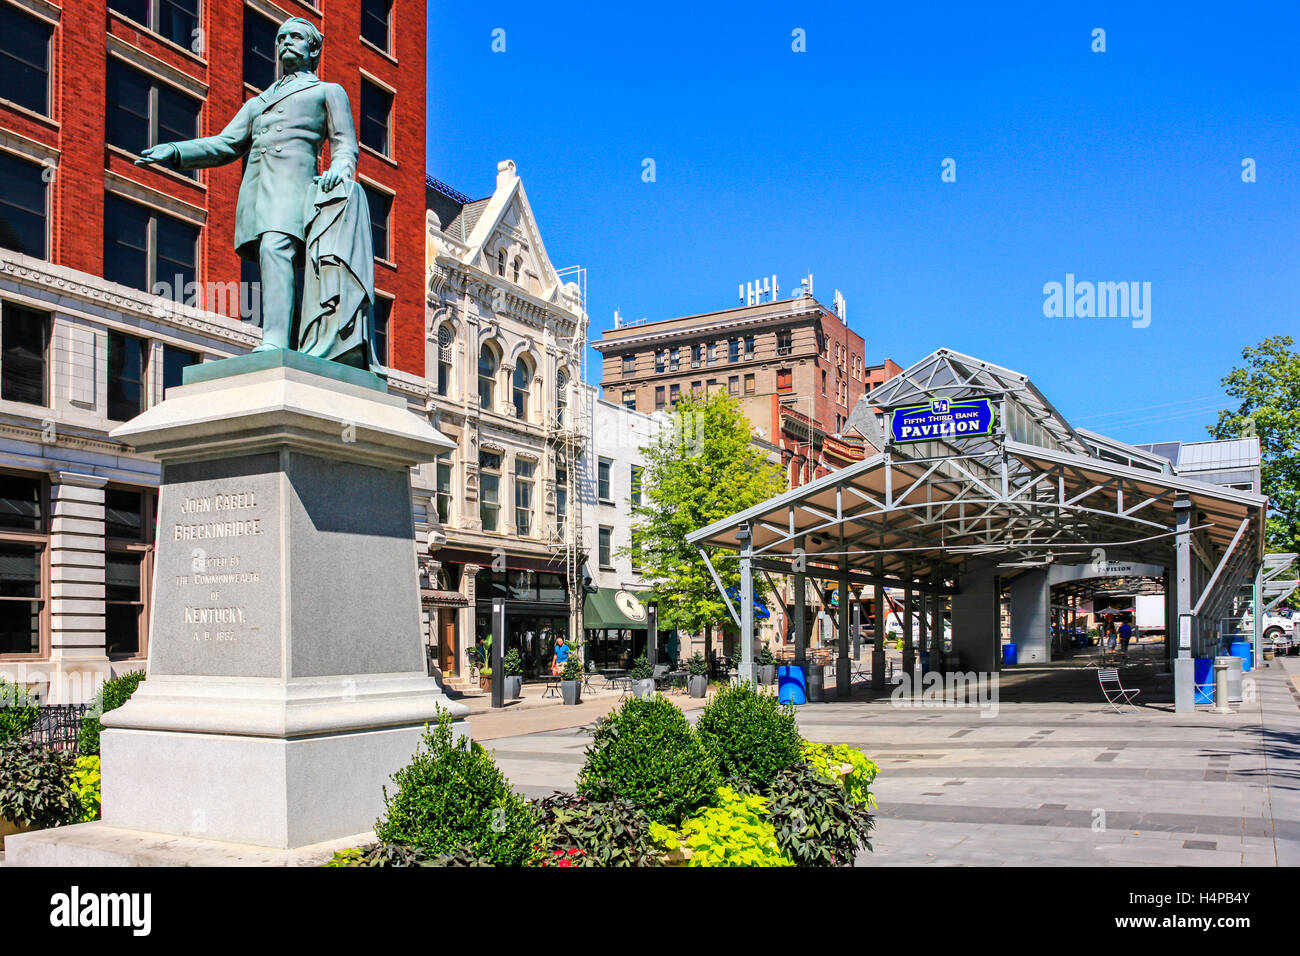 Statue of John Cabell Breckinridge at Cheapside Park on W Main St in Lexington KY Stock Photo